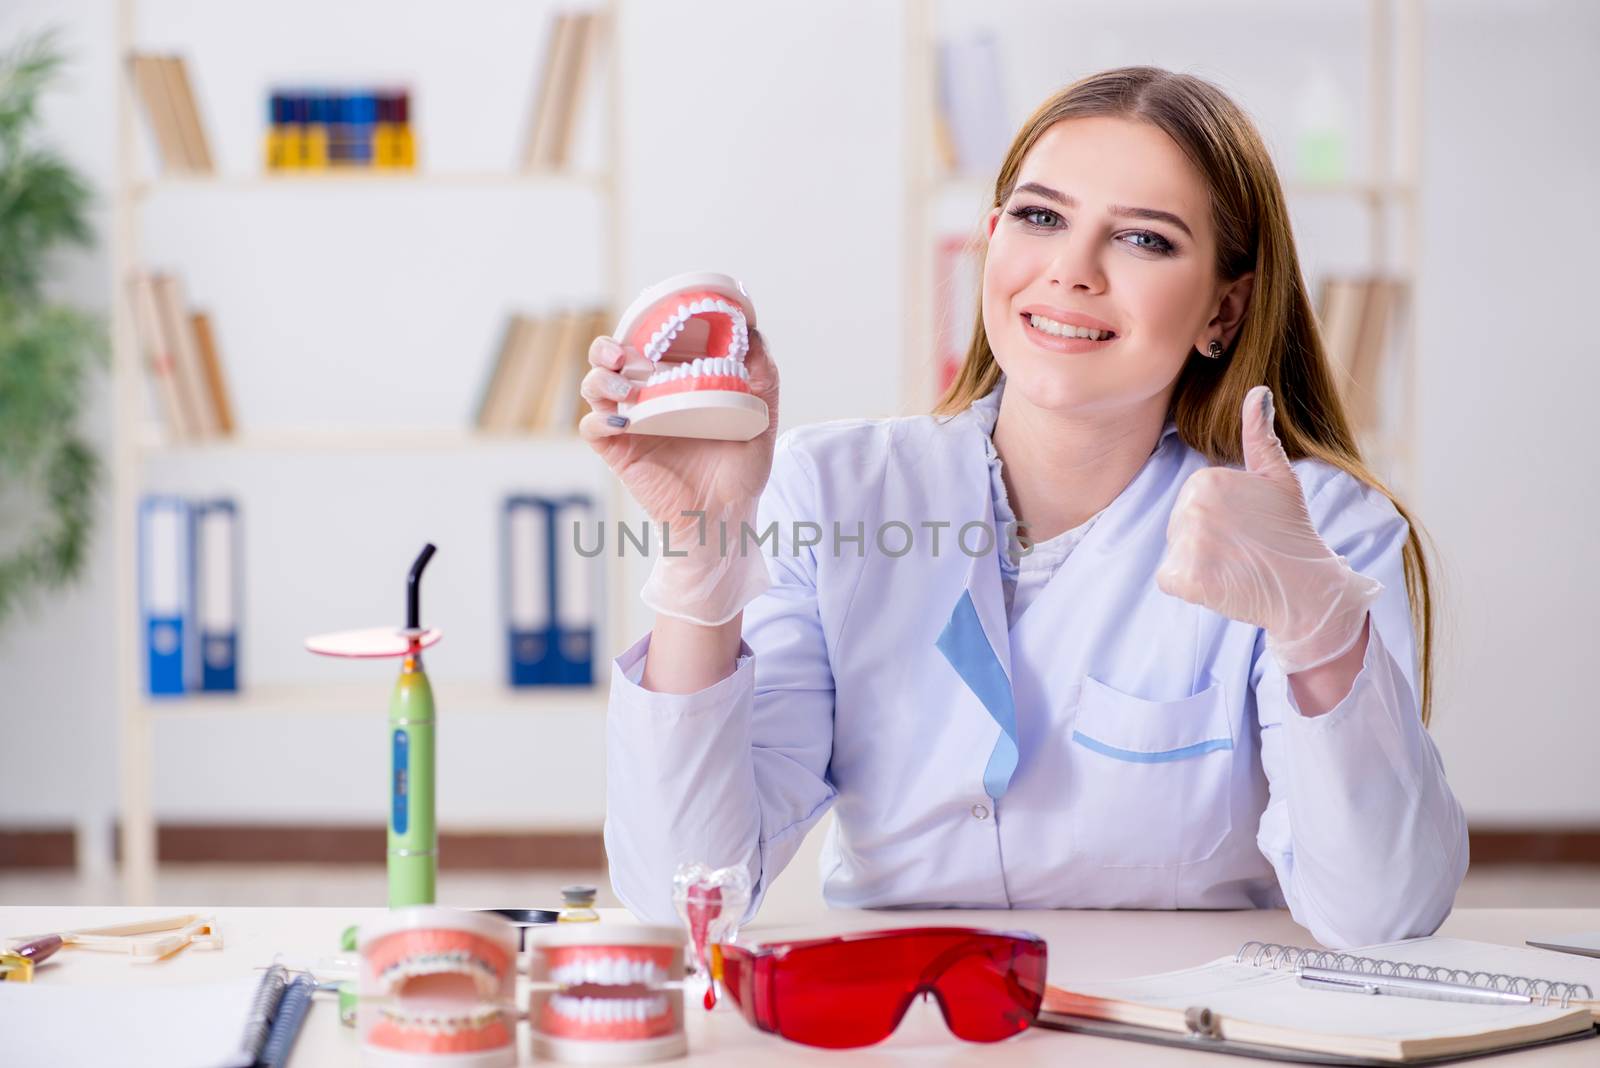 Dentistry student practicing skills in classroom by Elnur